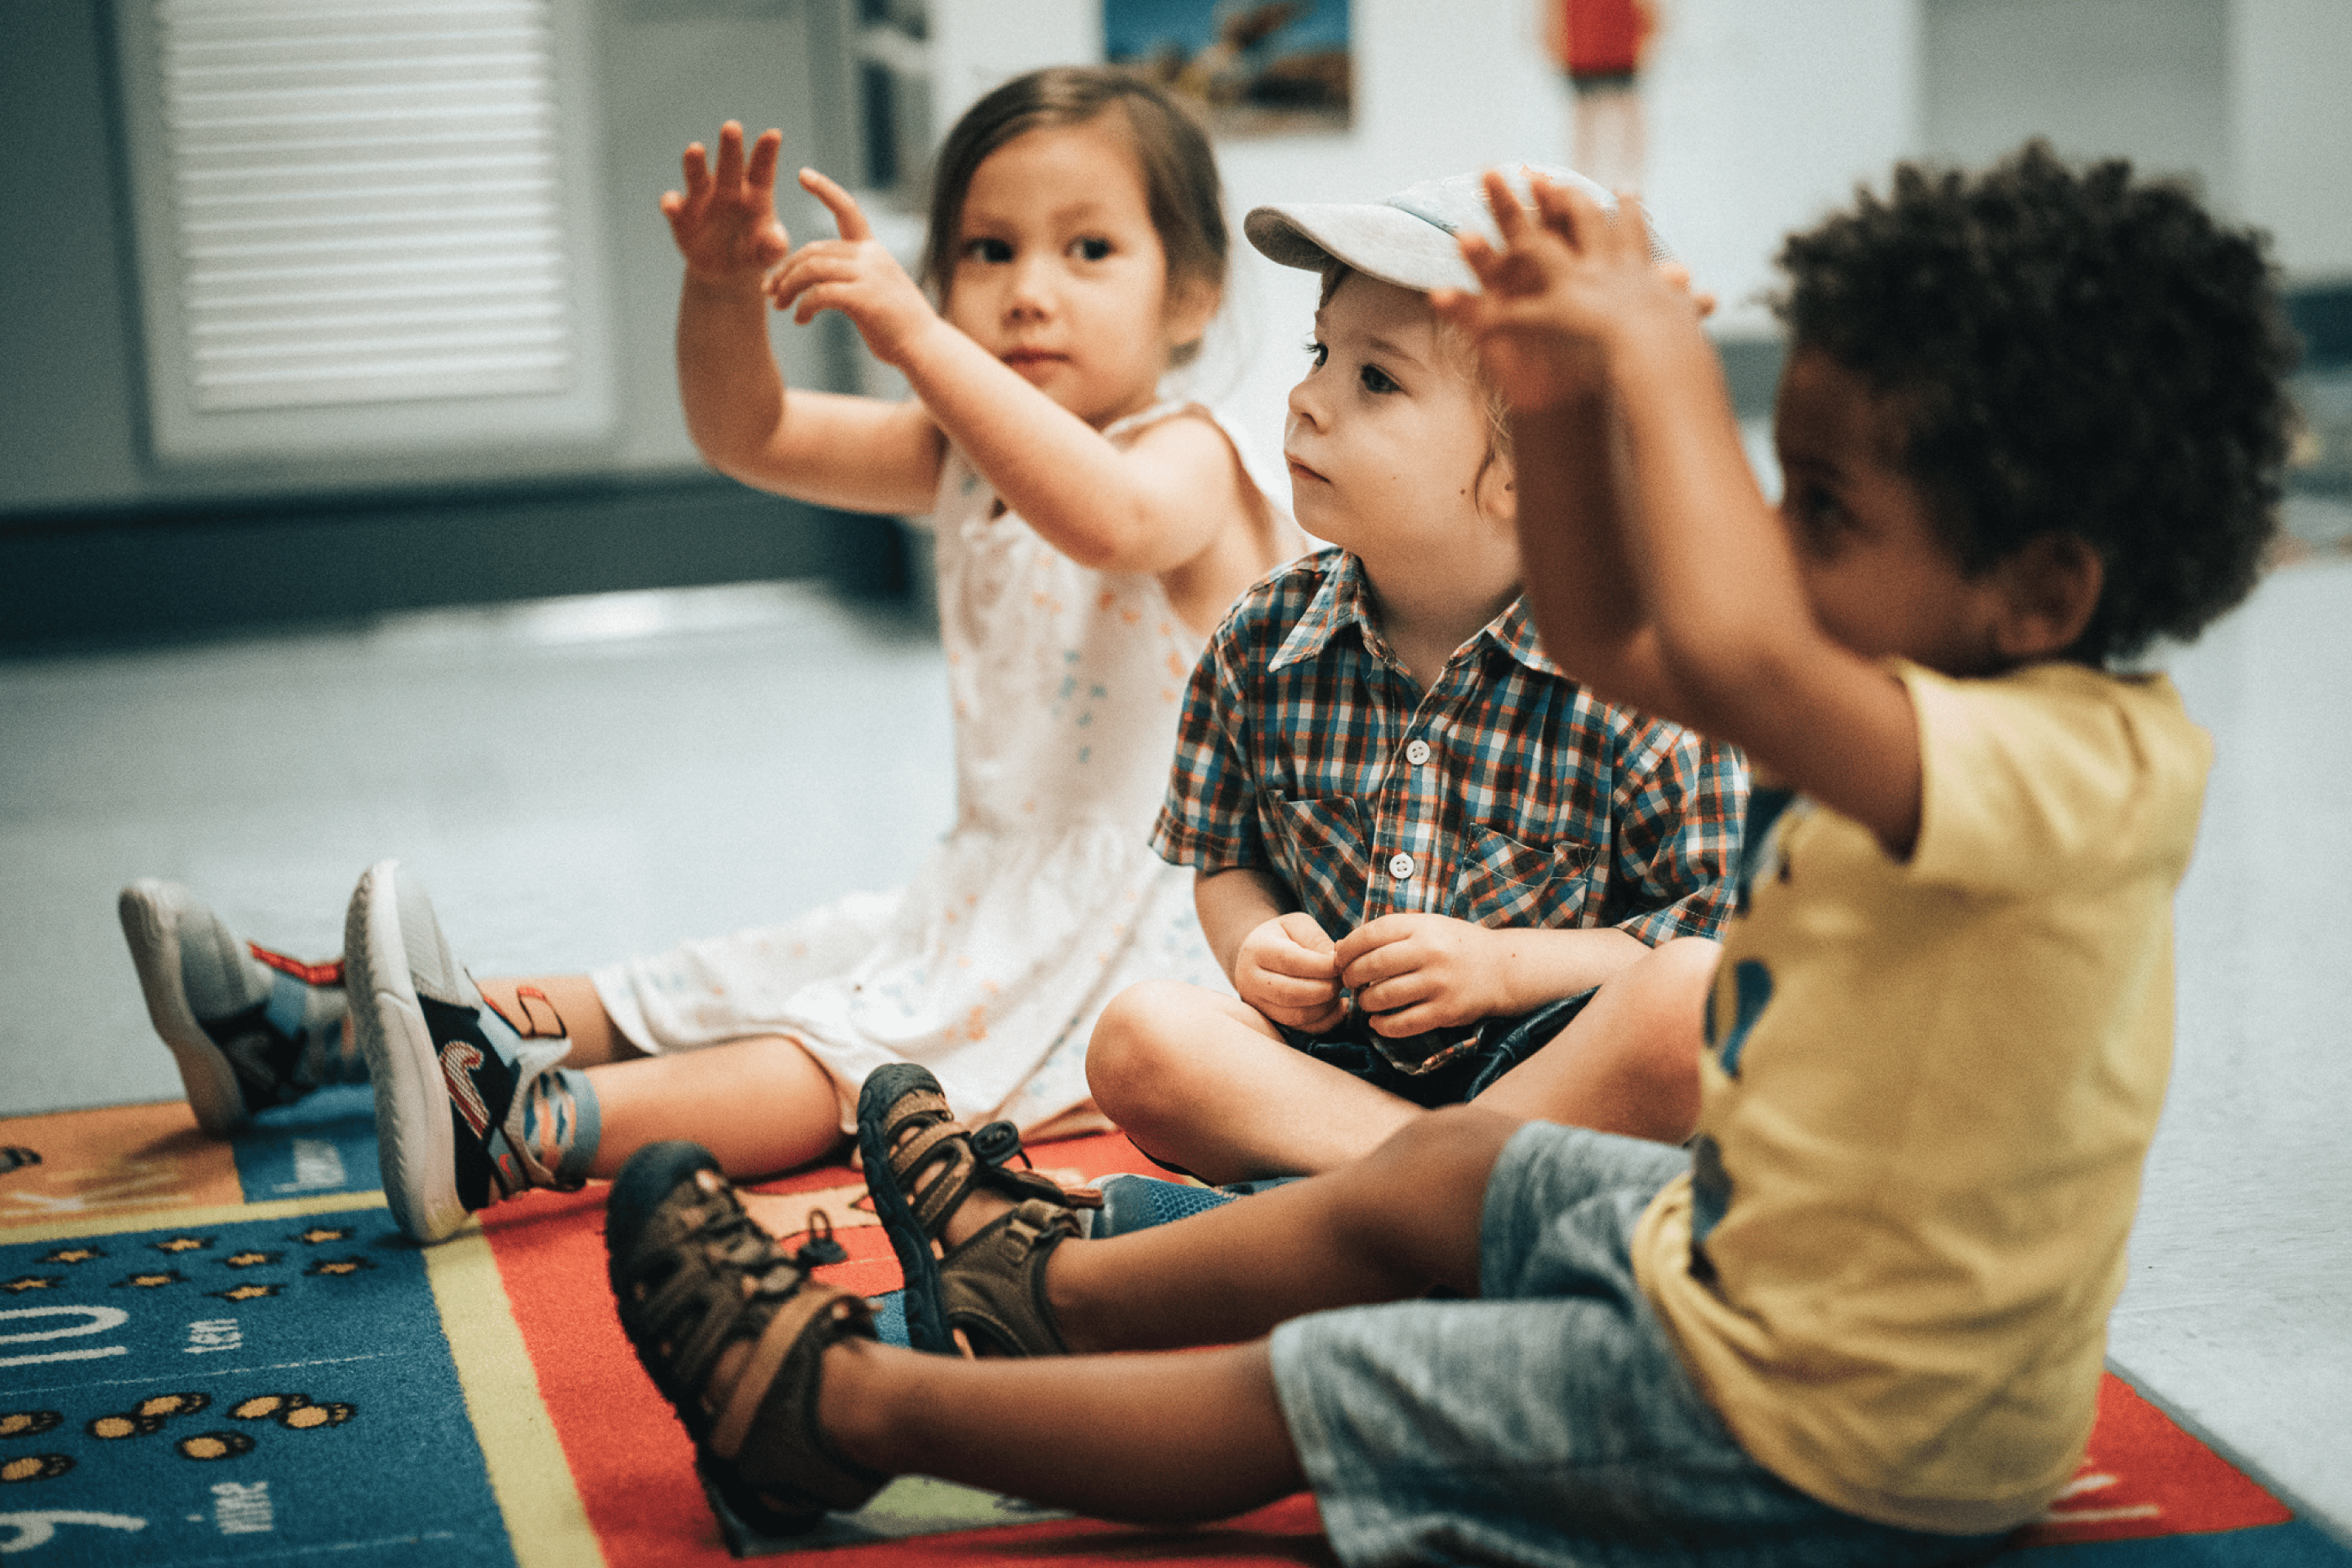 Children sit on a play mat and gesture with their hands.